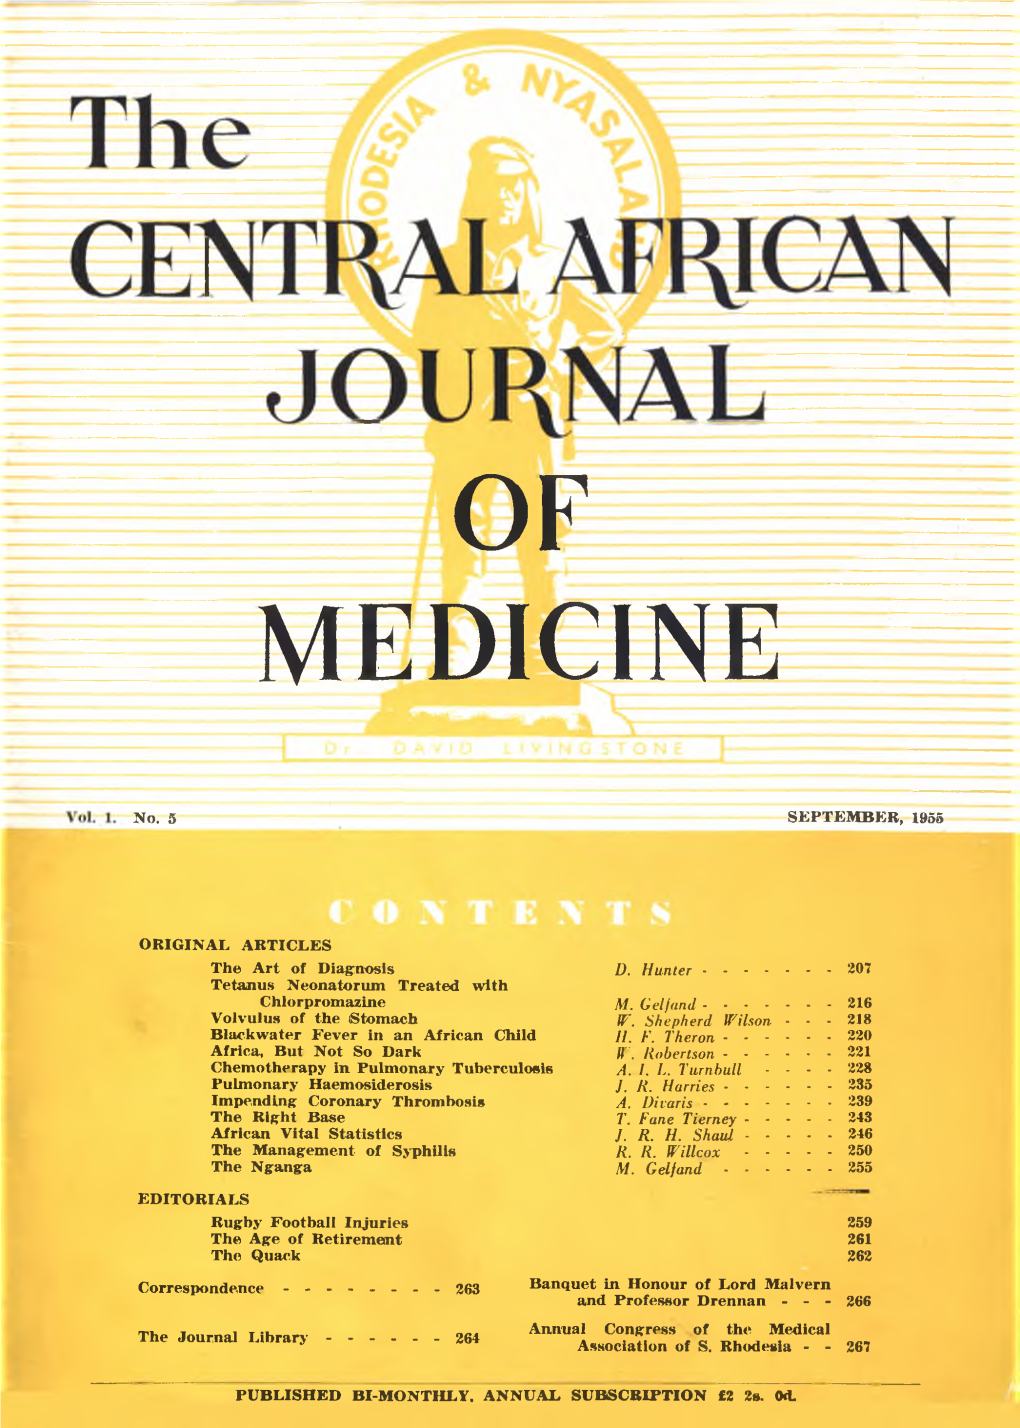 Diagnosis of Venereal Syphilis in the African